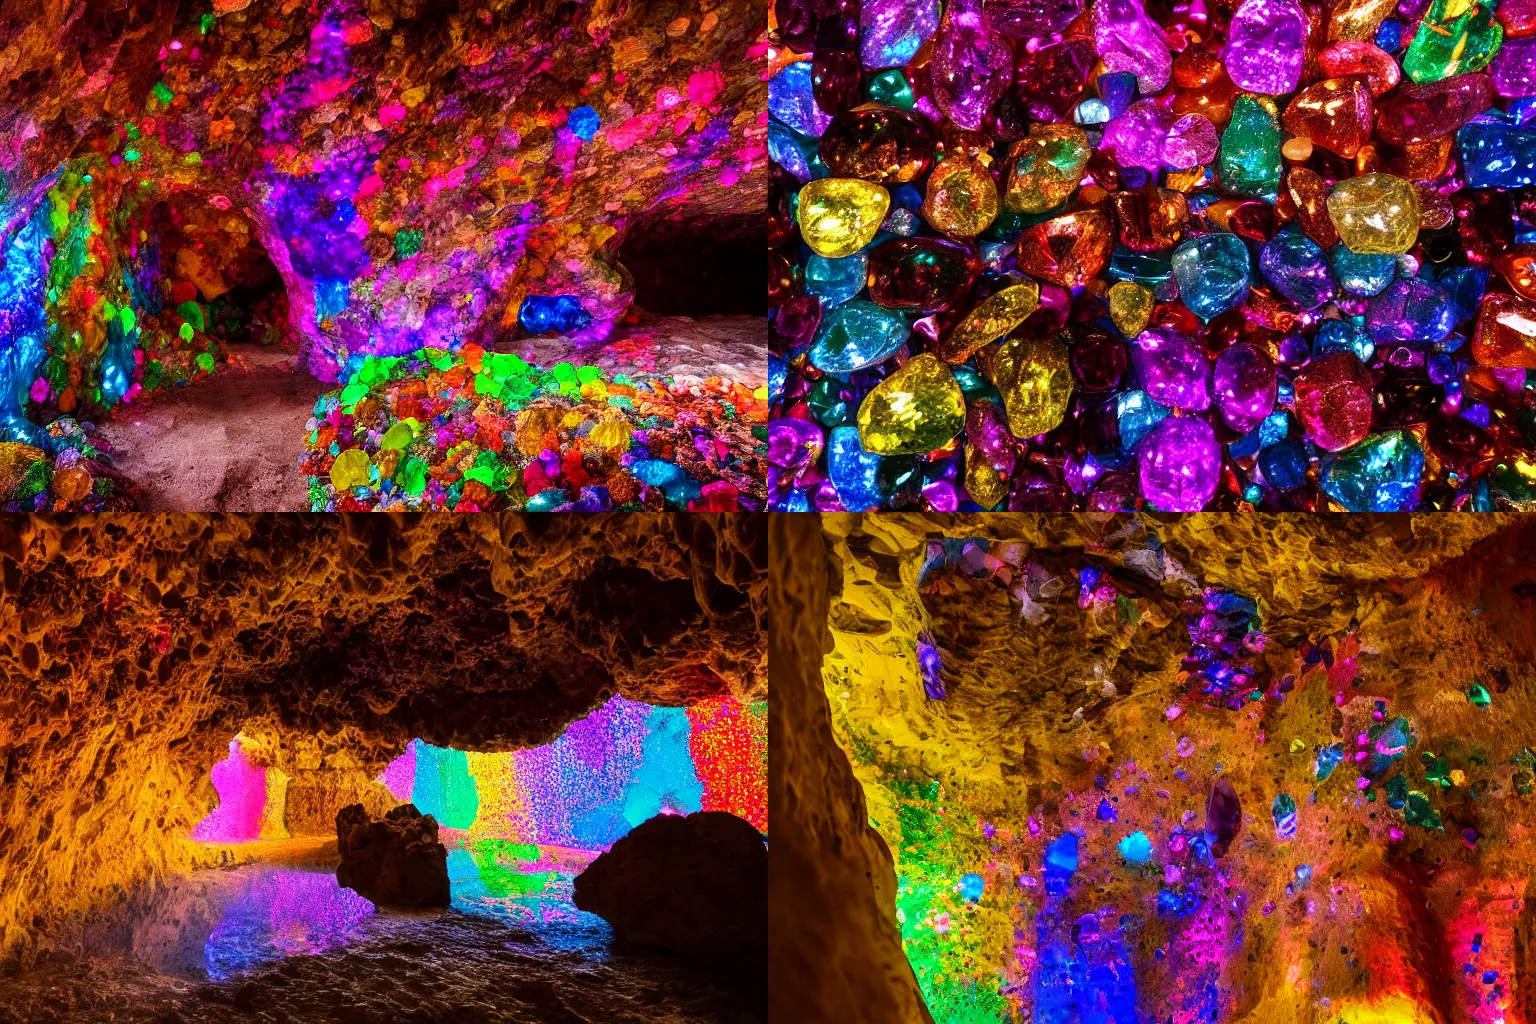 Prompt: cave with colorful shiny gemstones lining the walls, 4K photography